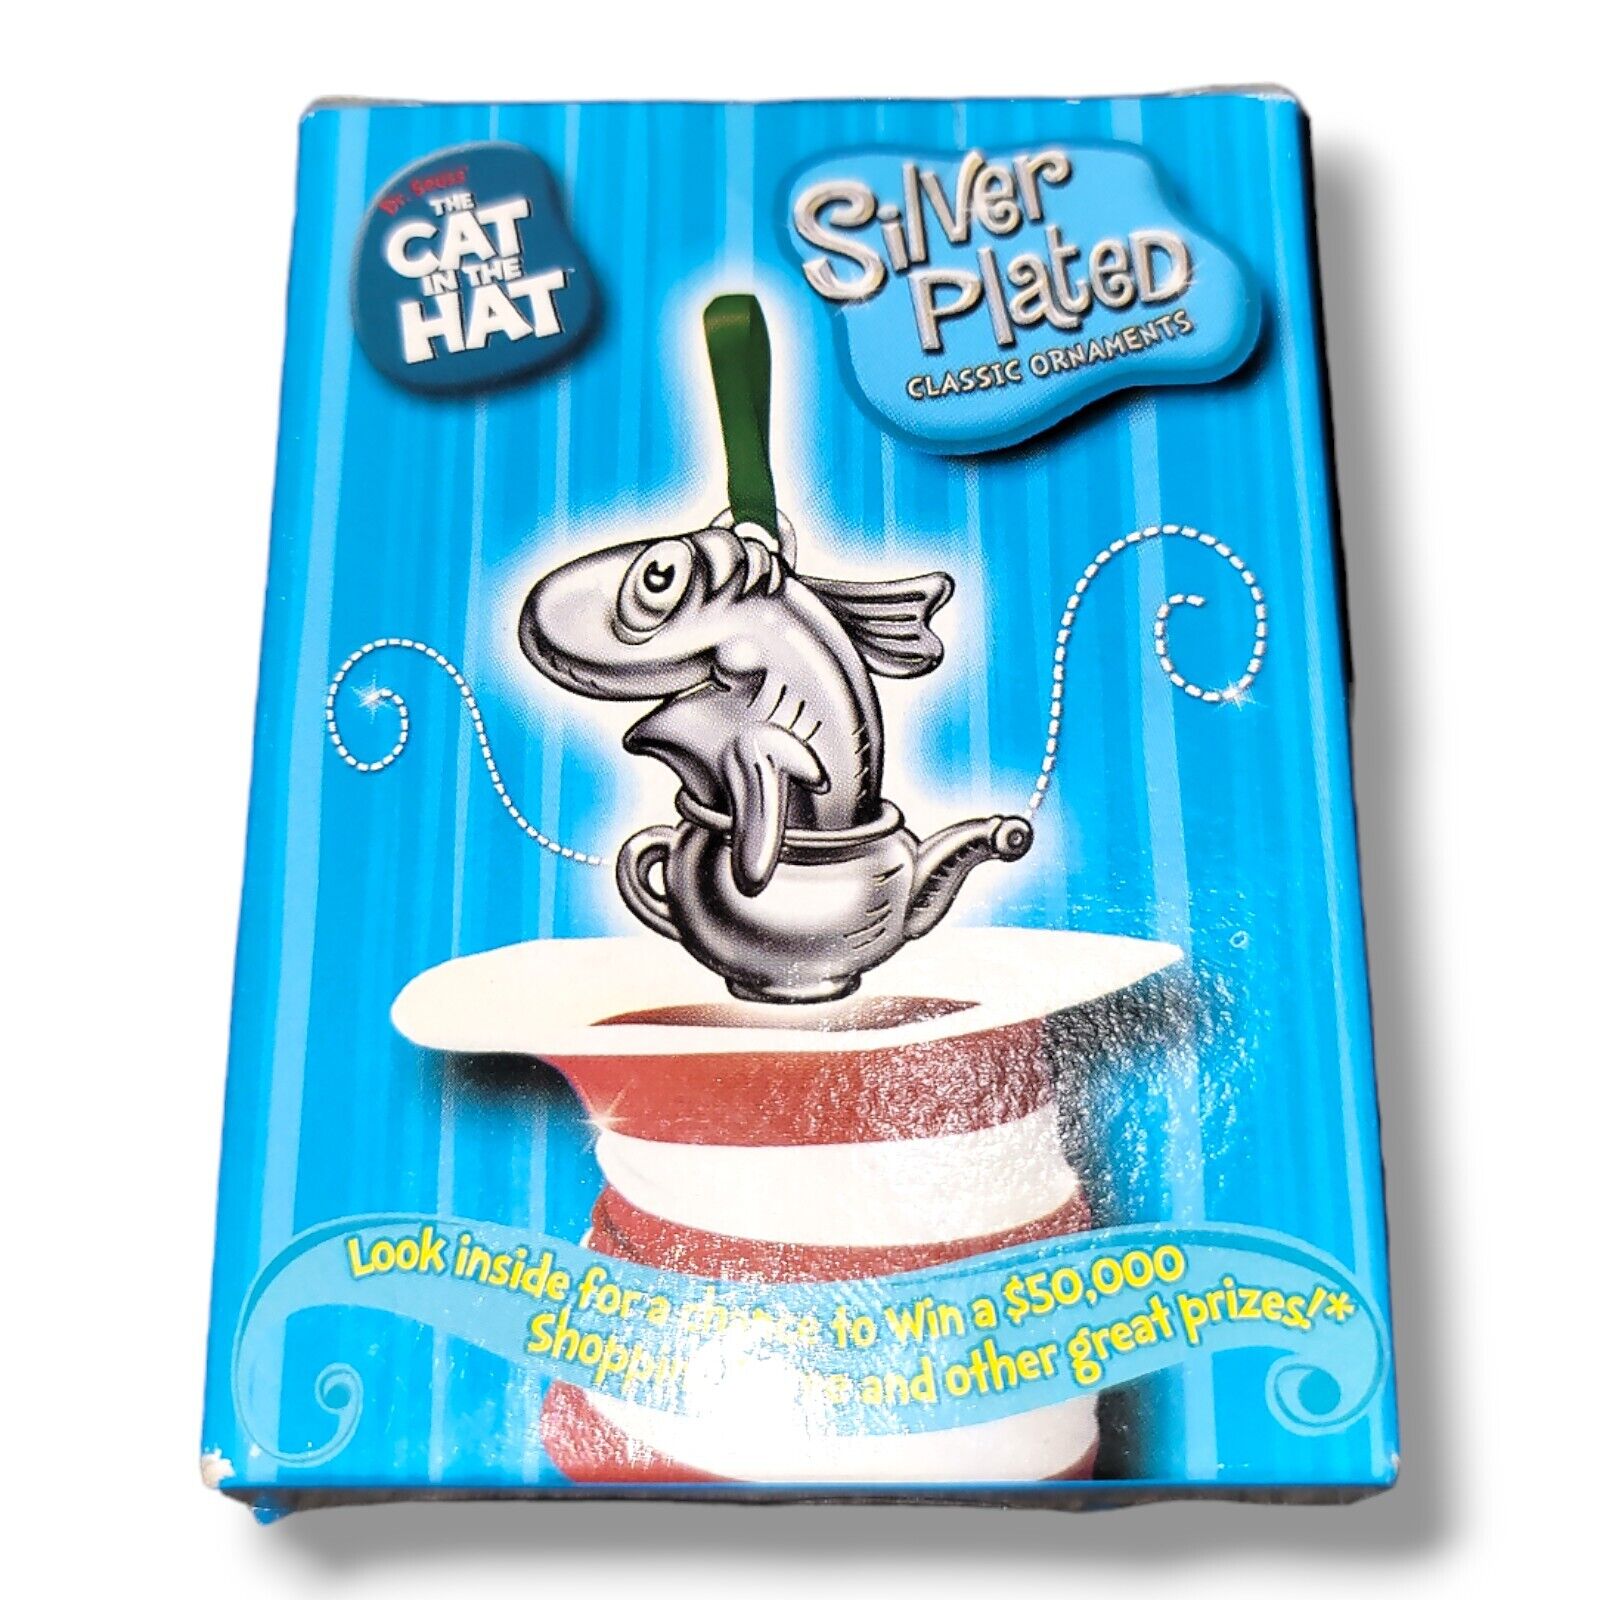 Dr. Seuss’ The Cat In The Hat “The Fish In A Dish” 2003 Silver Plated Ornament